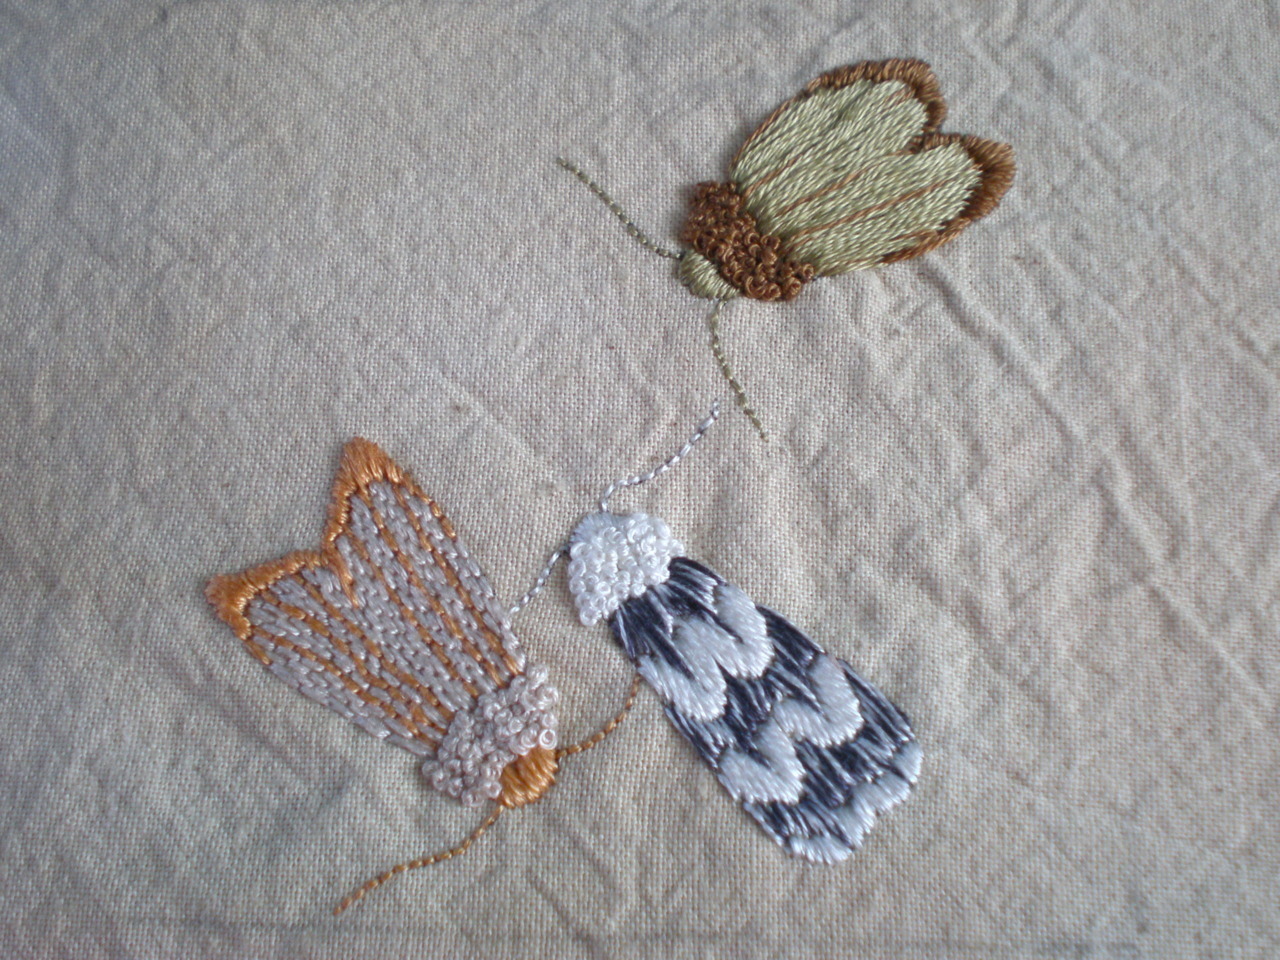 Hand embroidered moths on tea-dyed cotton by Mearle of http://birdcagebox.tumblr.com/